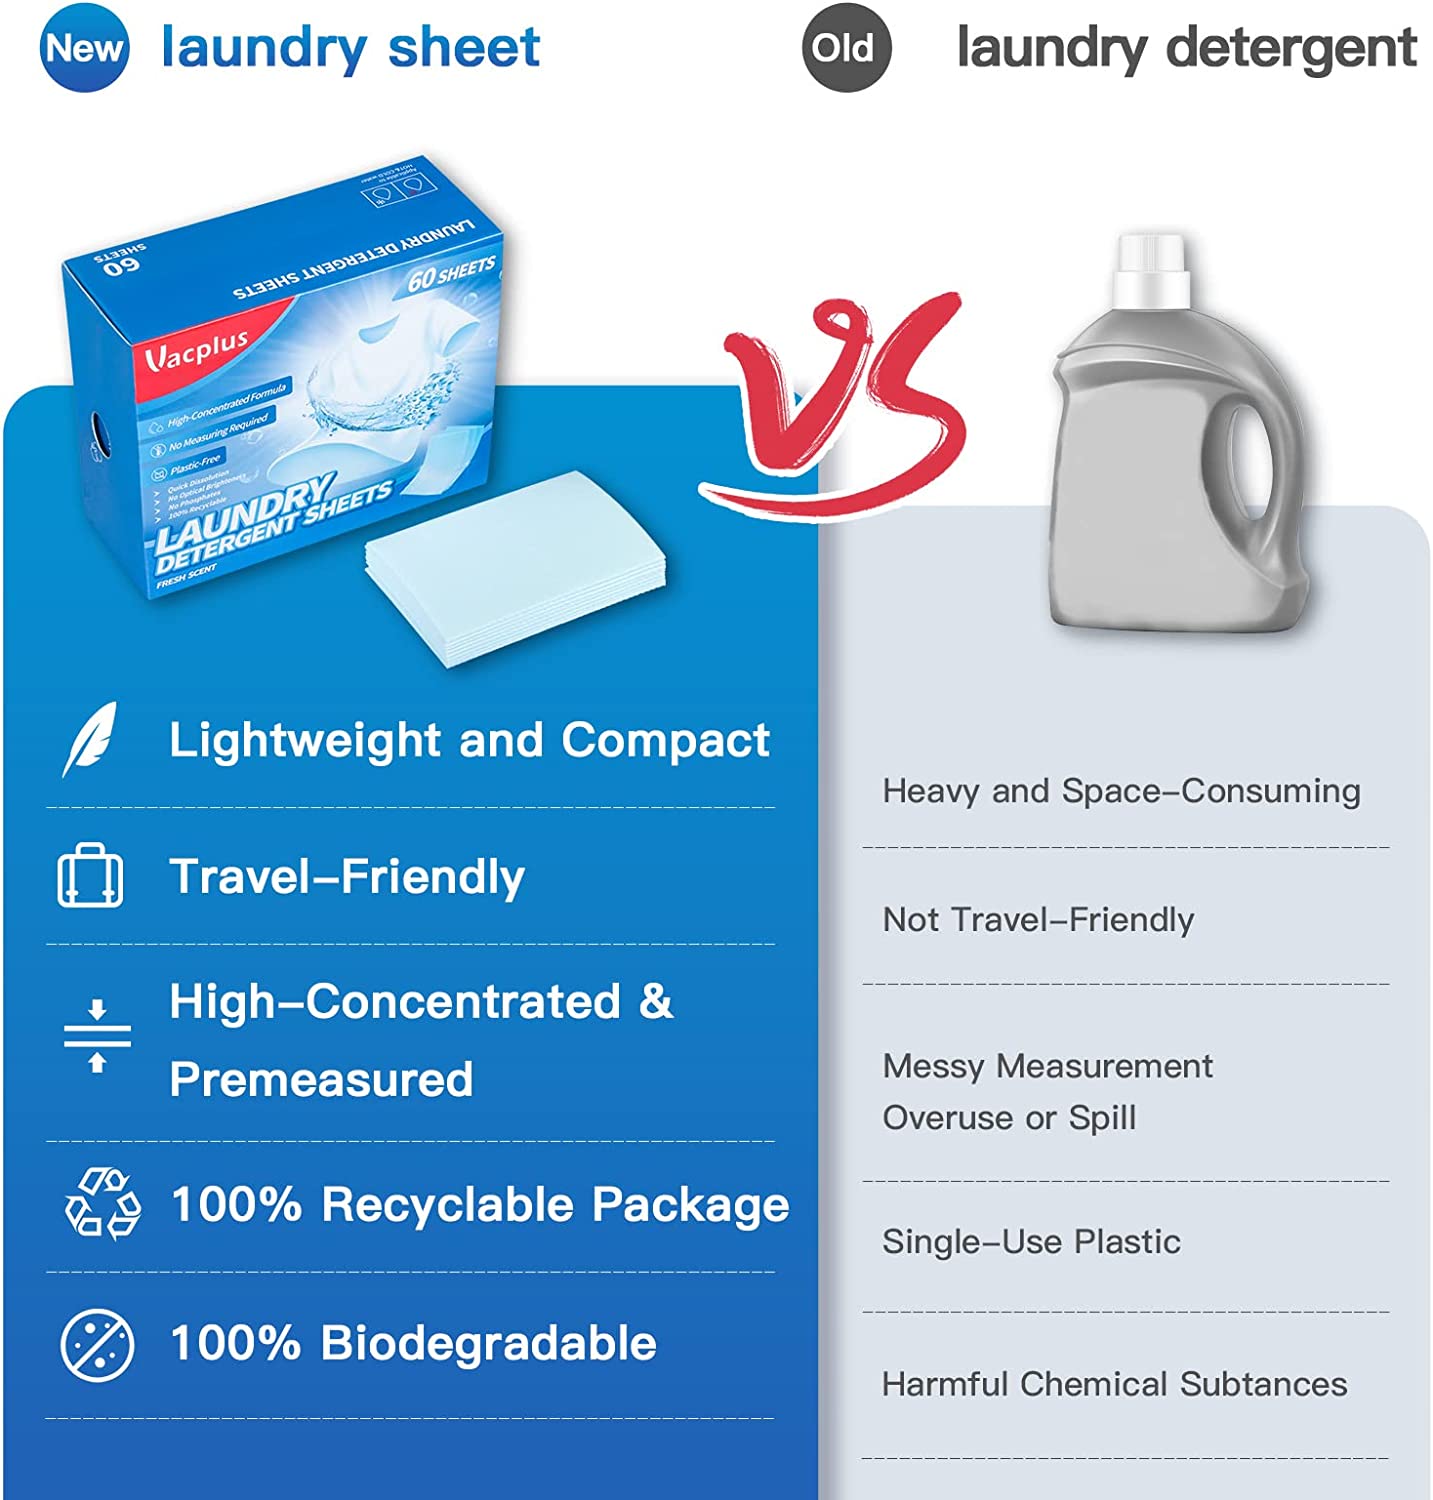 Laundry Detergent Sheets, Laundry Detergent Strips